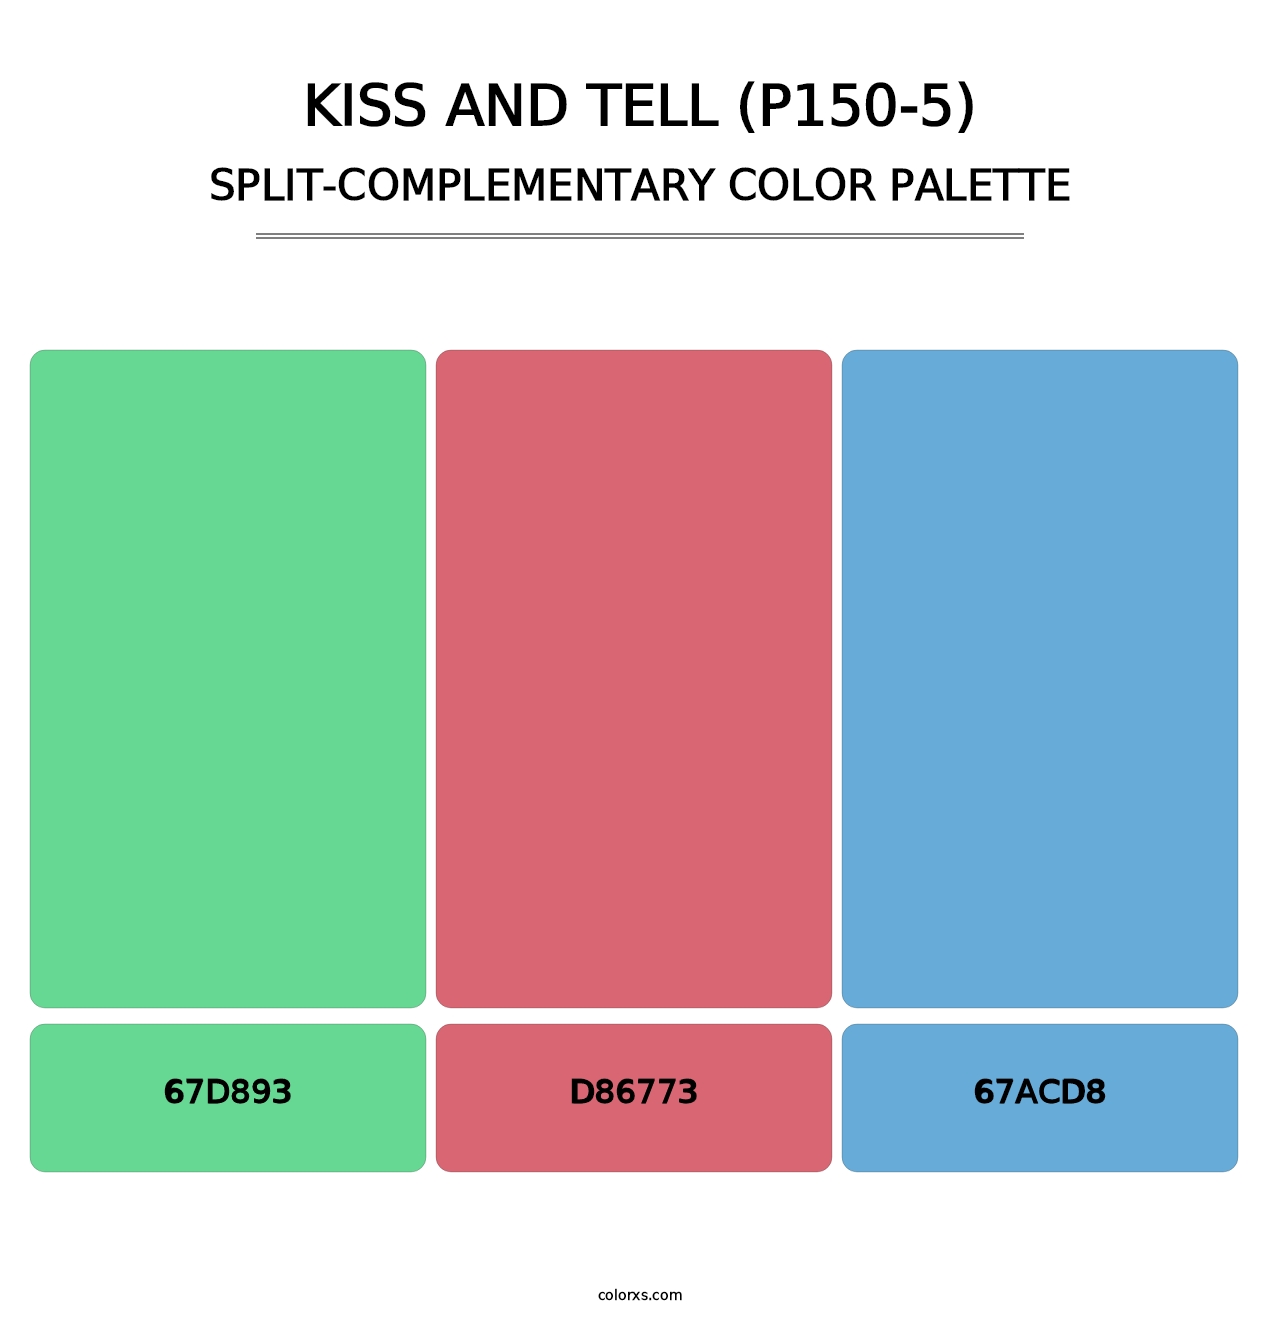 Kiss And Tell (P150-5) - Split-Complementary Color Palette